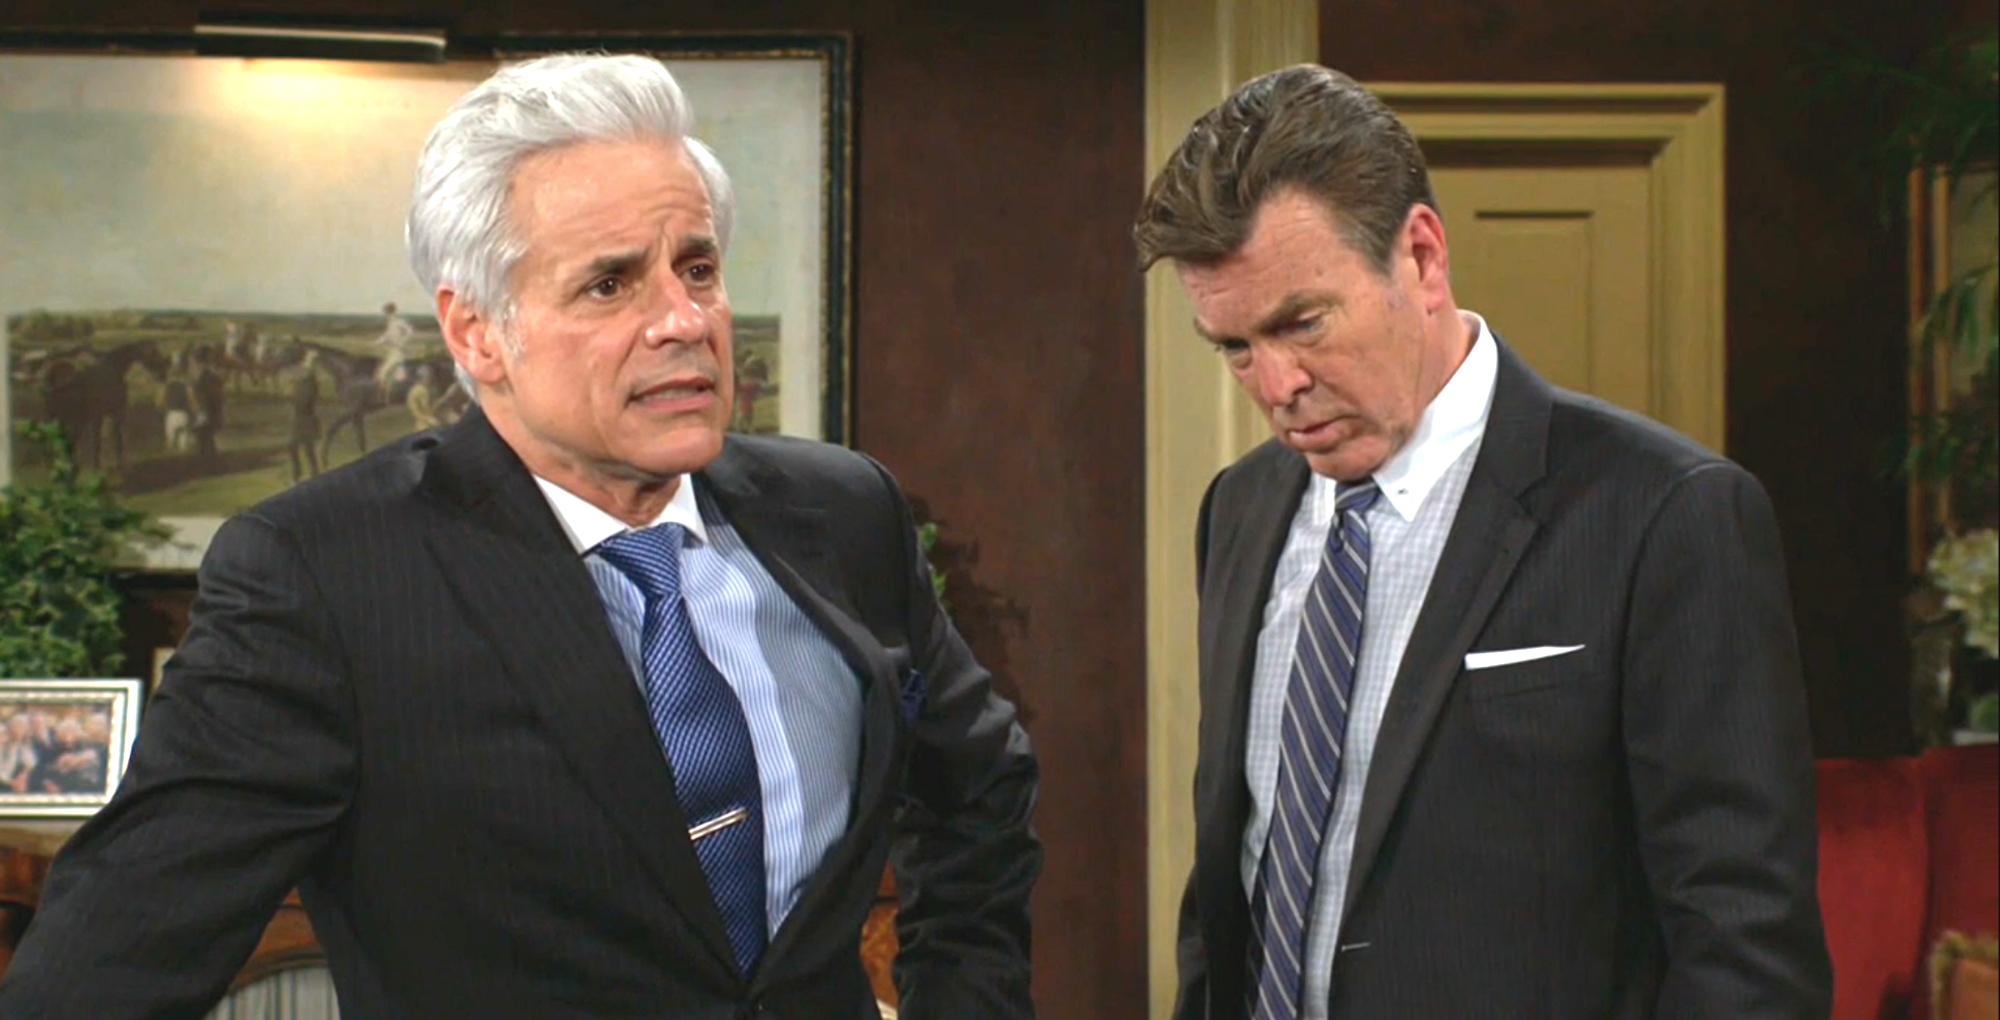 michael baldwin and jack at the abbott home in the young and the restless recap for may 12, 2023.